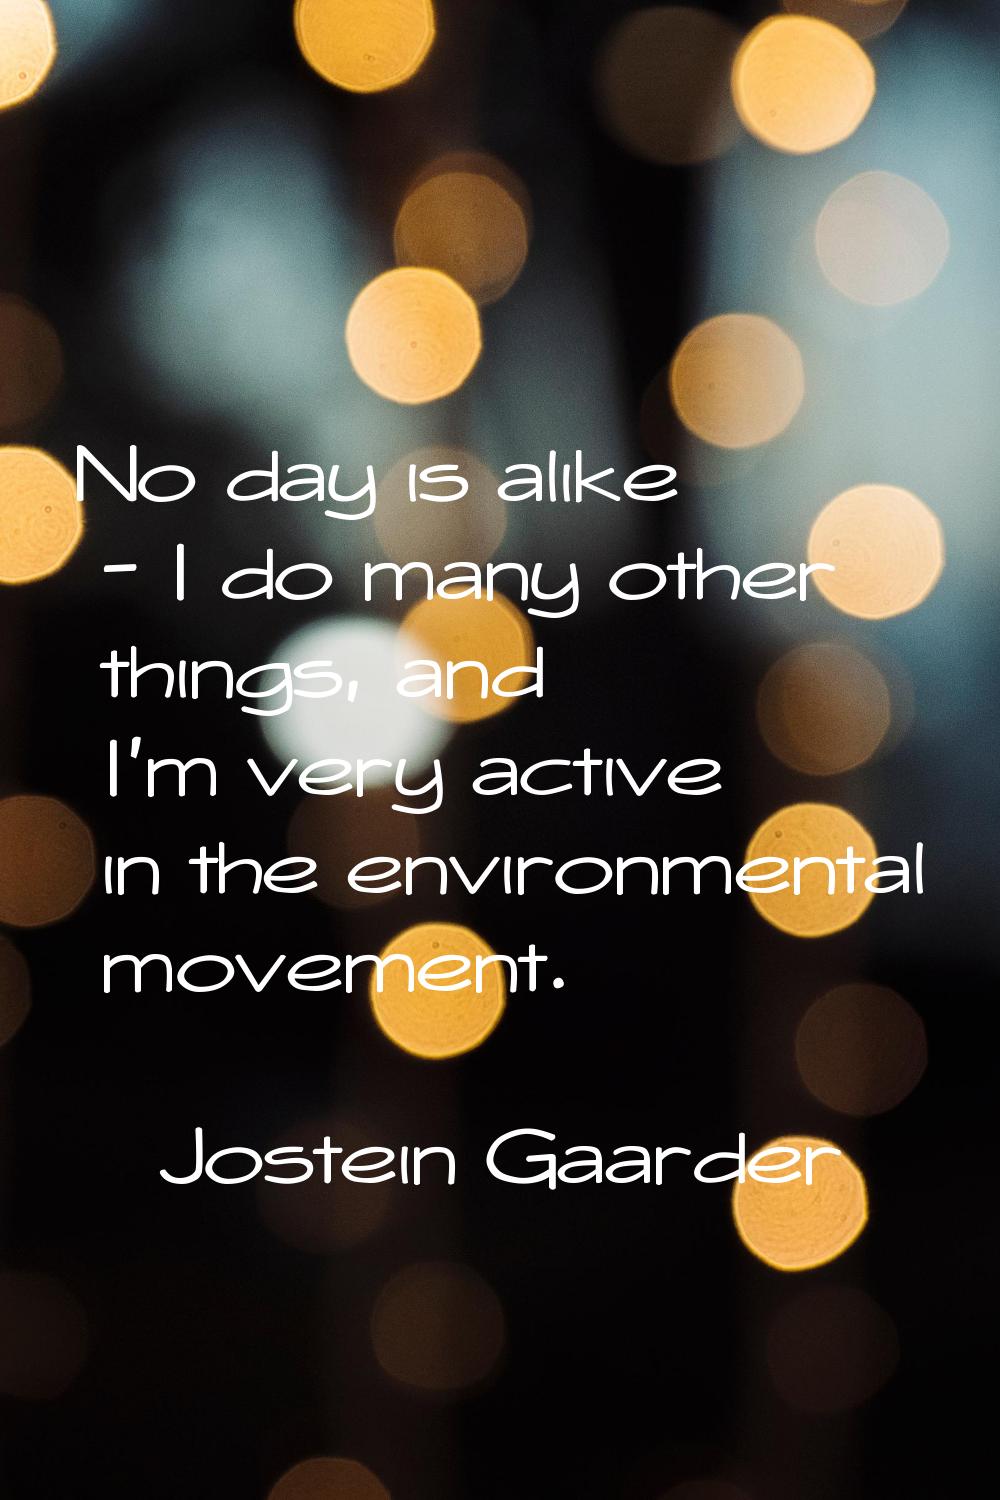 No day is alike - I do many other things, and I'm very active in the environmental movement.